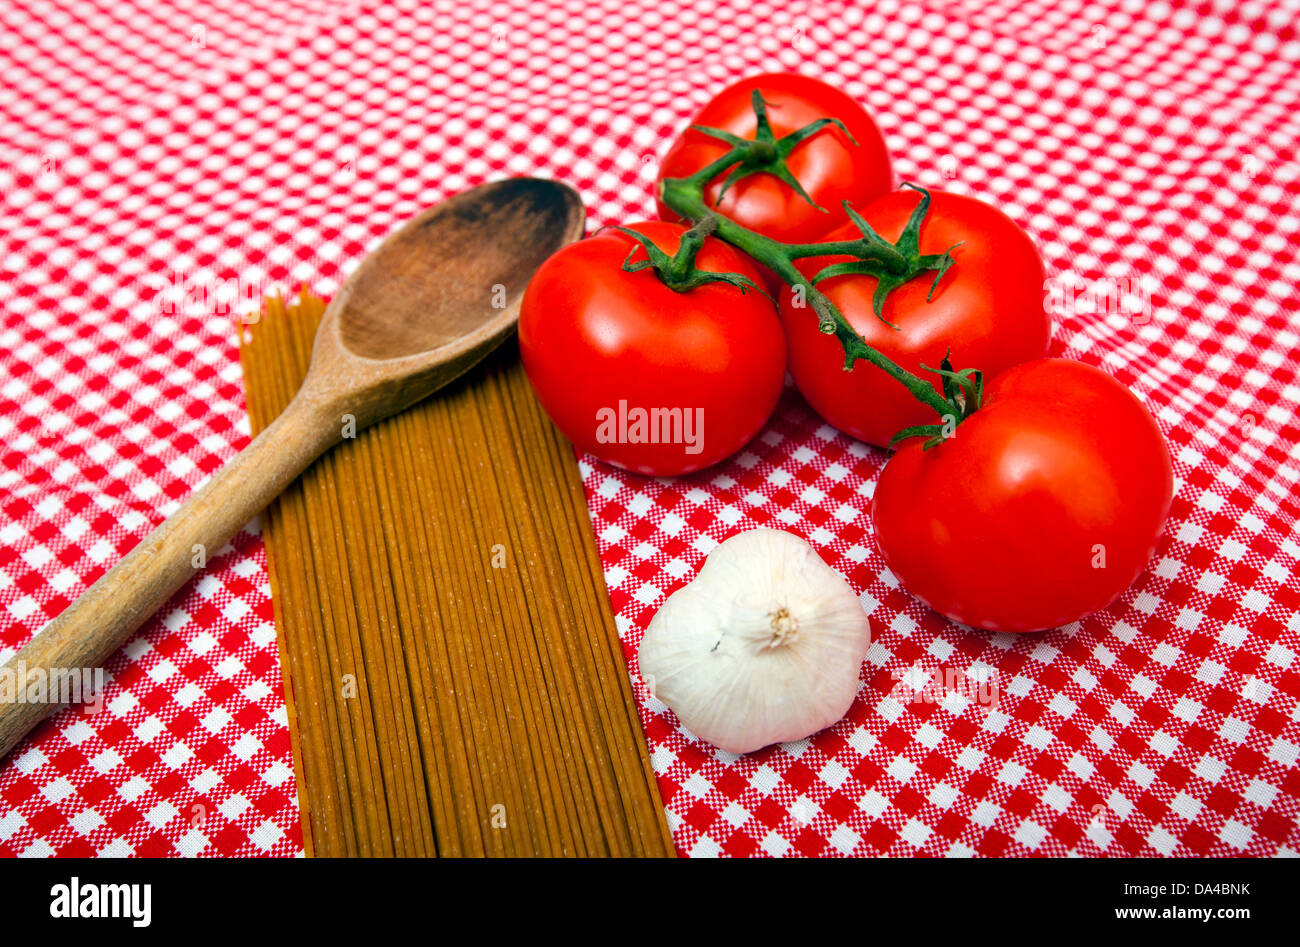 Spaghetti, Garlic and Tomato home cooking ingredients Stock Photo